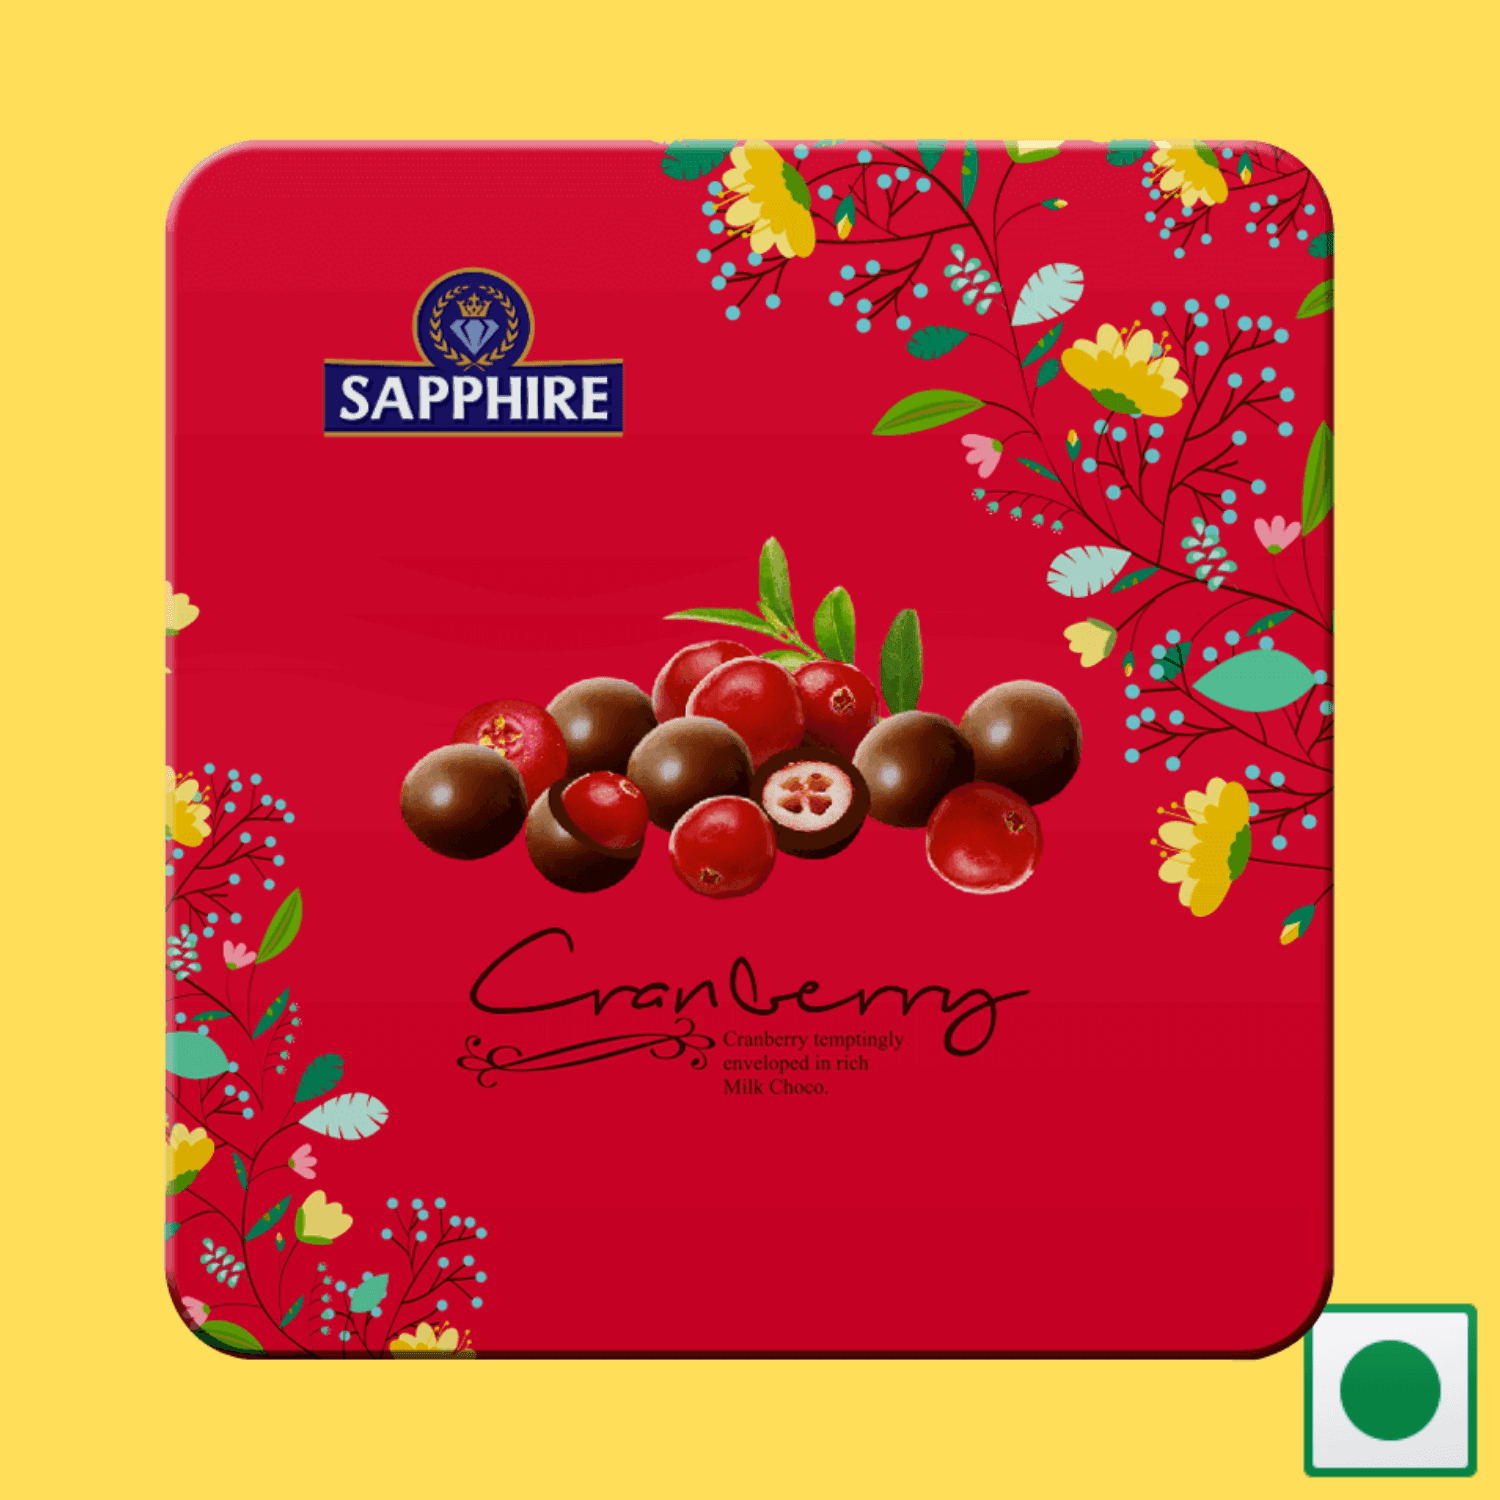 Sapphire Chocolate Coated Nuts, Cranberry, 200g - Super 7 Mart